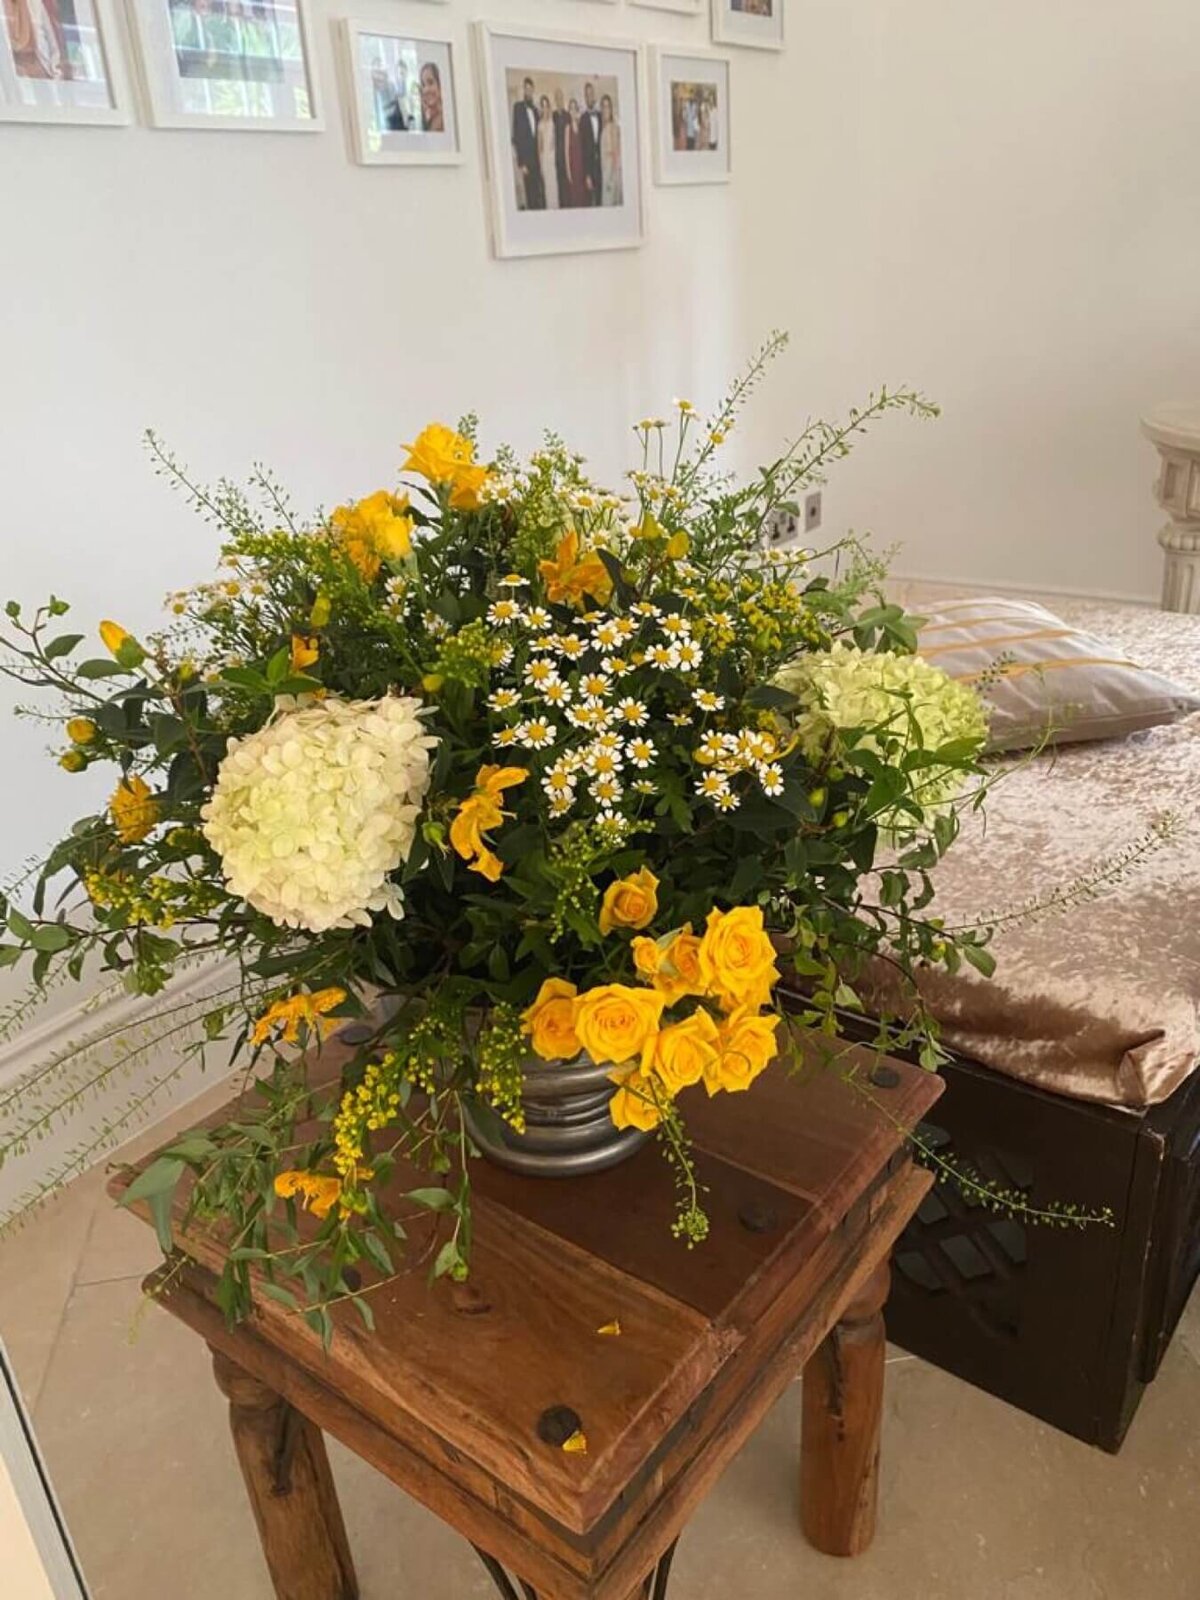 Large yellow flower arrangement on a wooden table filled with daisies, roses and hydrangeas